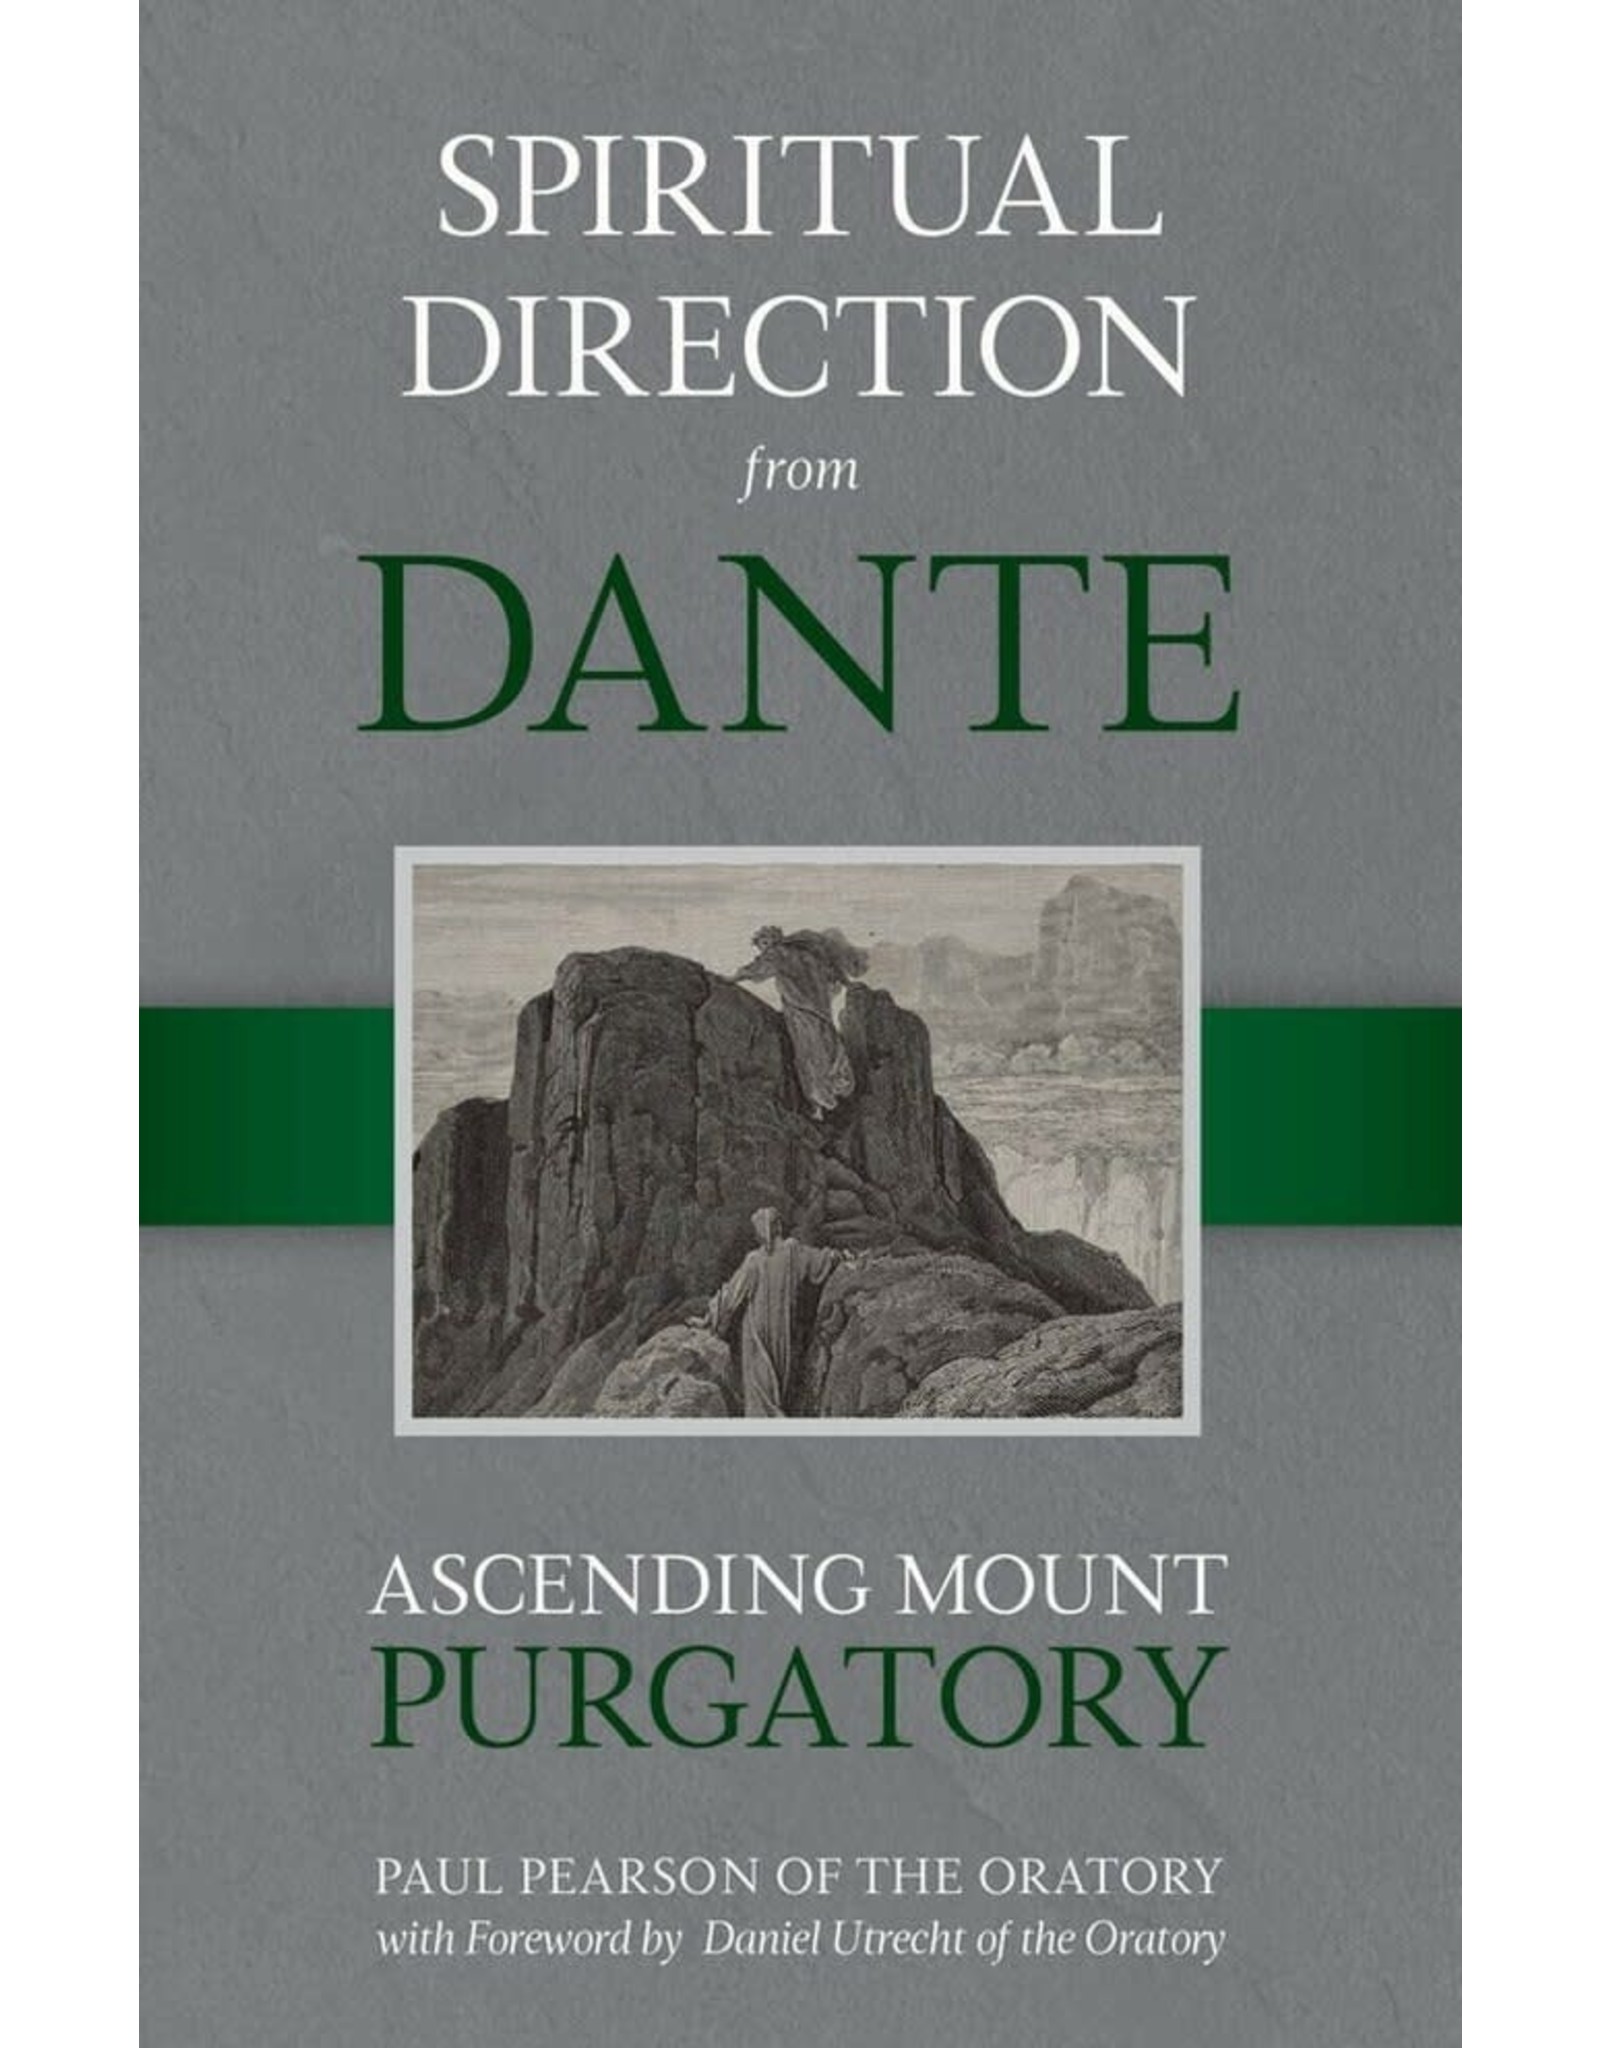 Tan Books Spiritual Direction from Dante: Ascending Mount Purgatory by Paul Pearson of the Oratory (Hardcover)